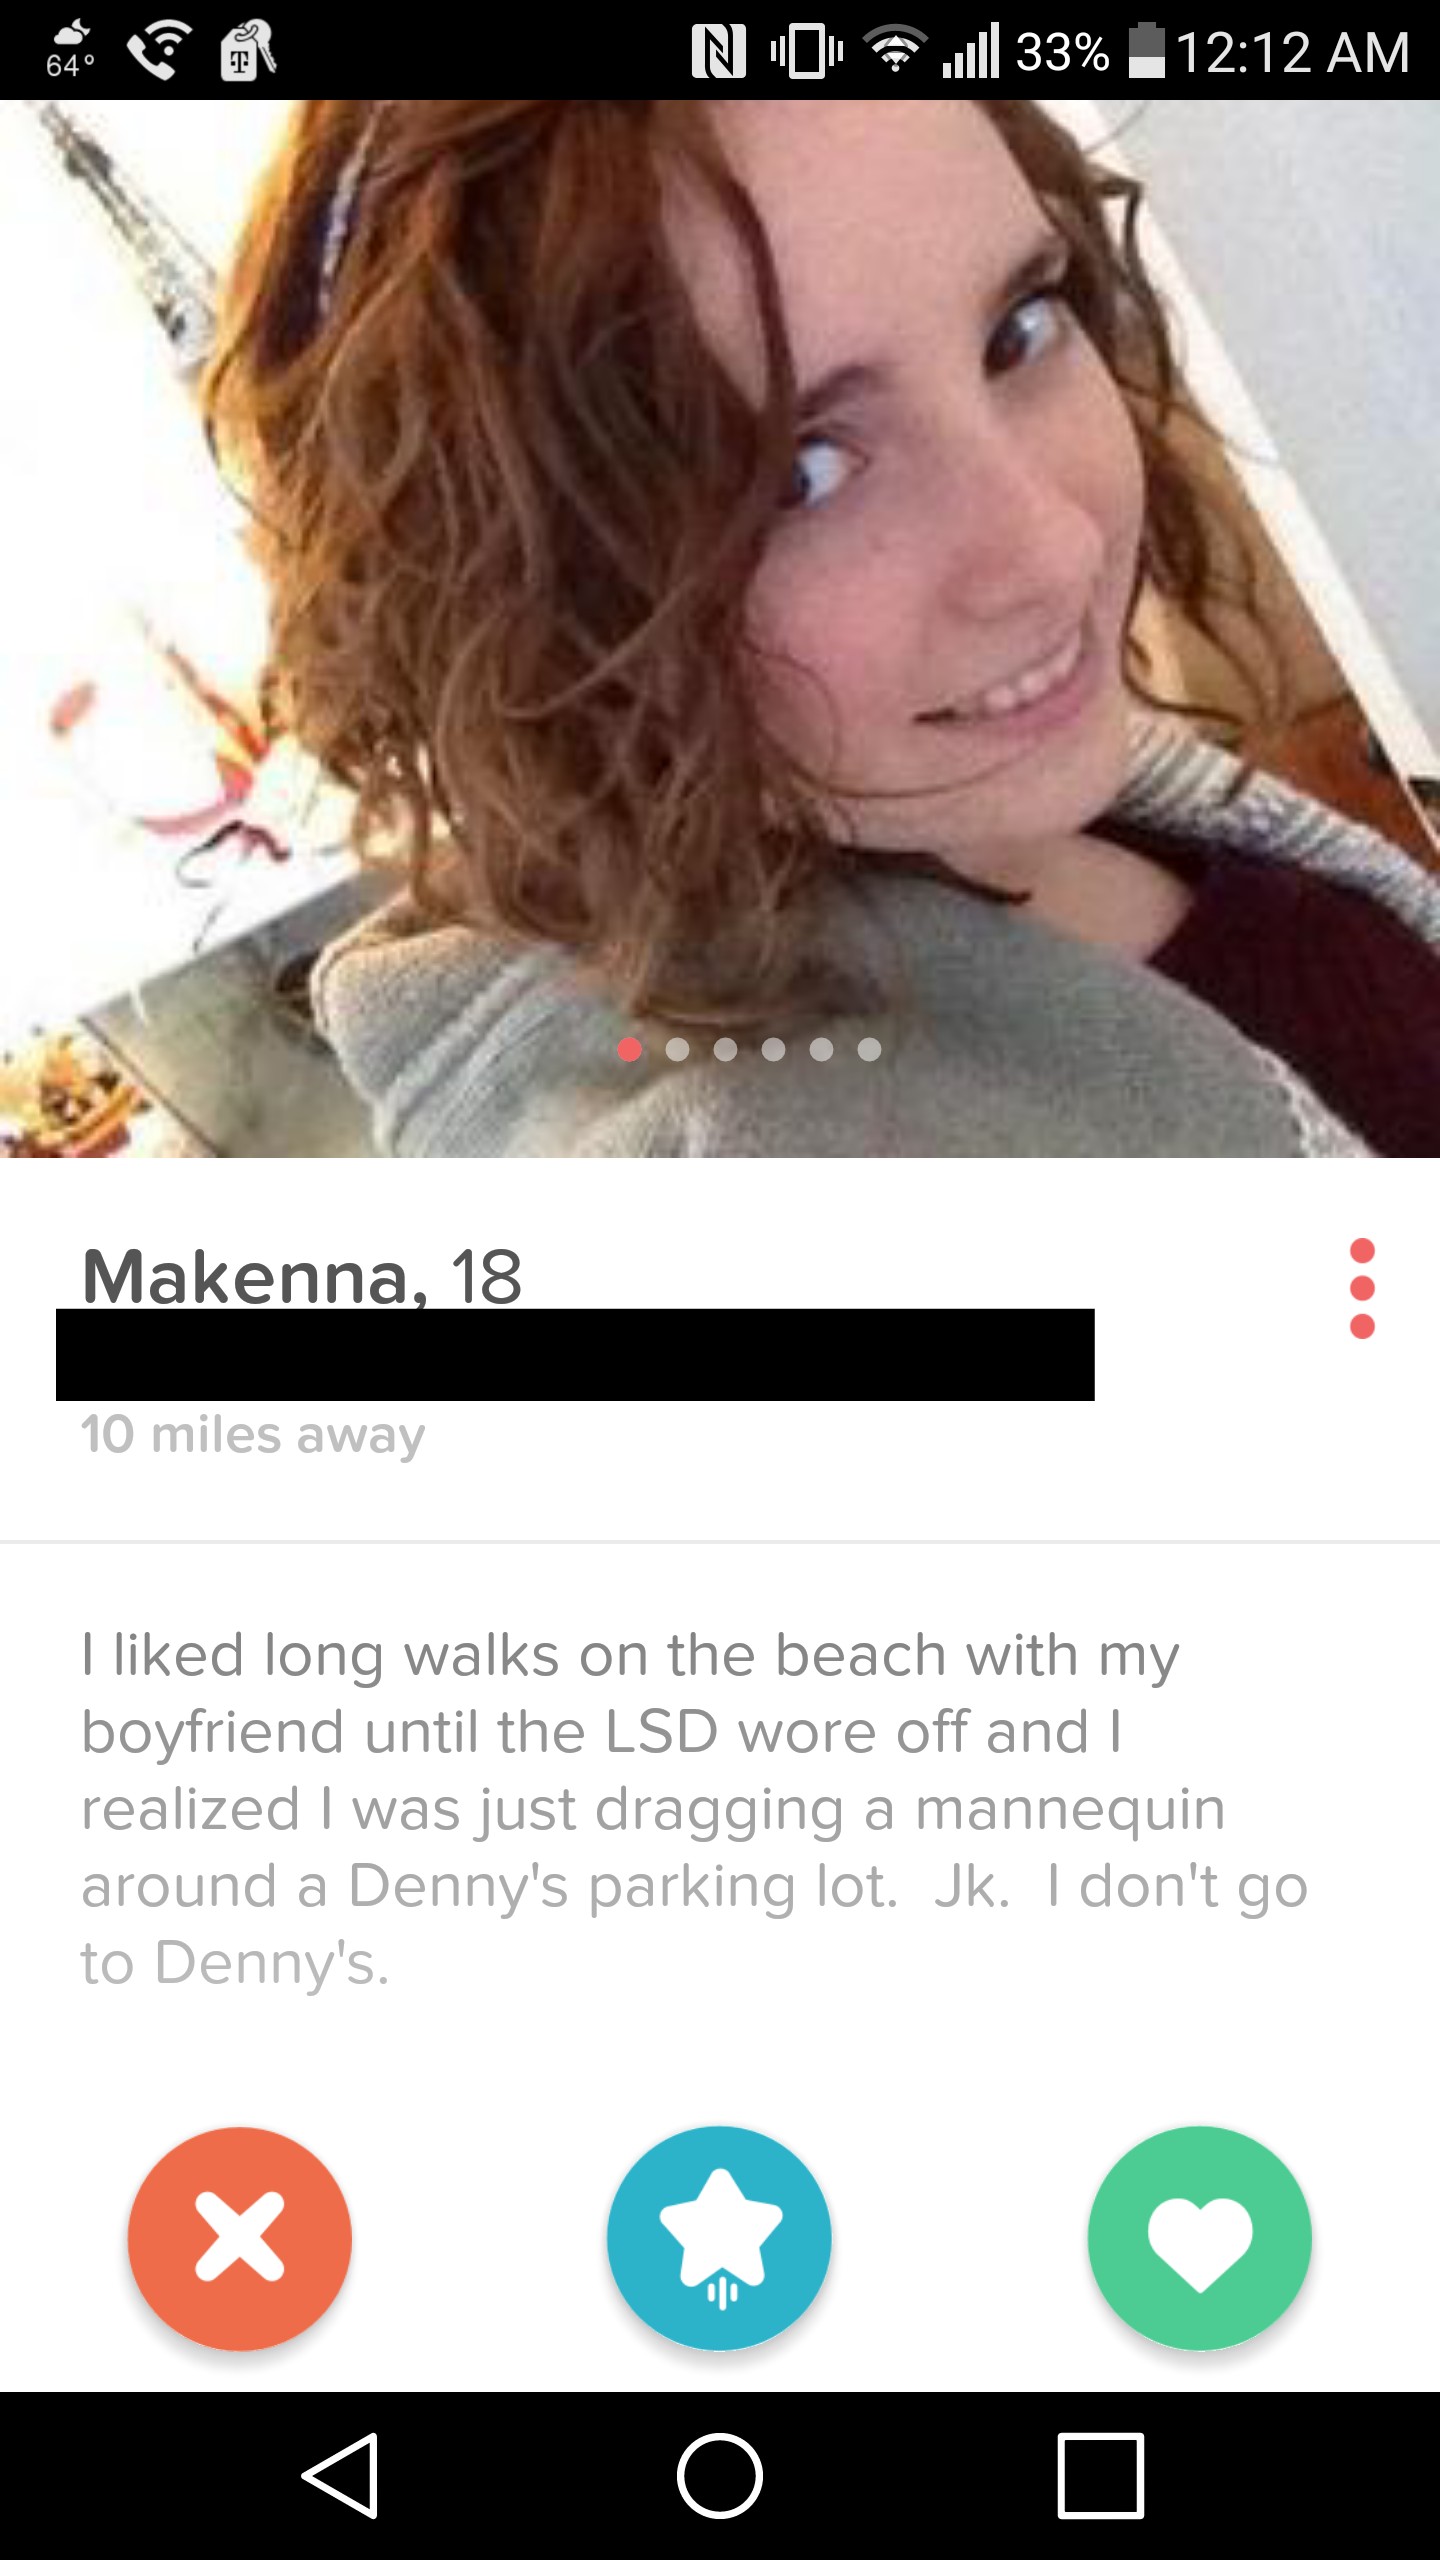 tinder uncircumcised - No .11 33% Makenna, 18 10 miles away I d long walks on the beach with my boyfriend until the Lsd wore off and I realized I was just dragging a mannequin around a Denny's parking lot. Jk. I don't go to Denny's.